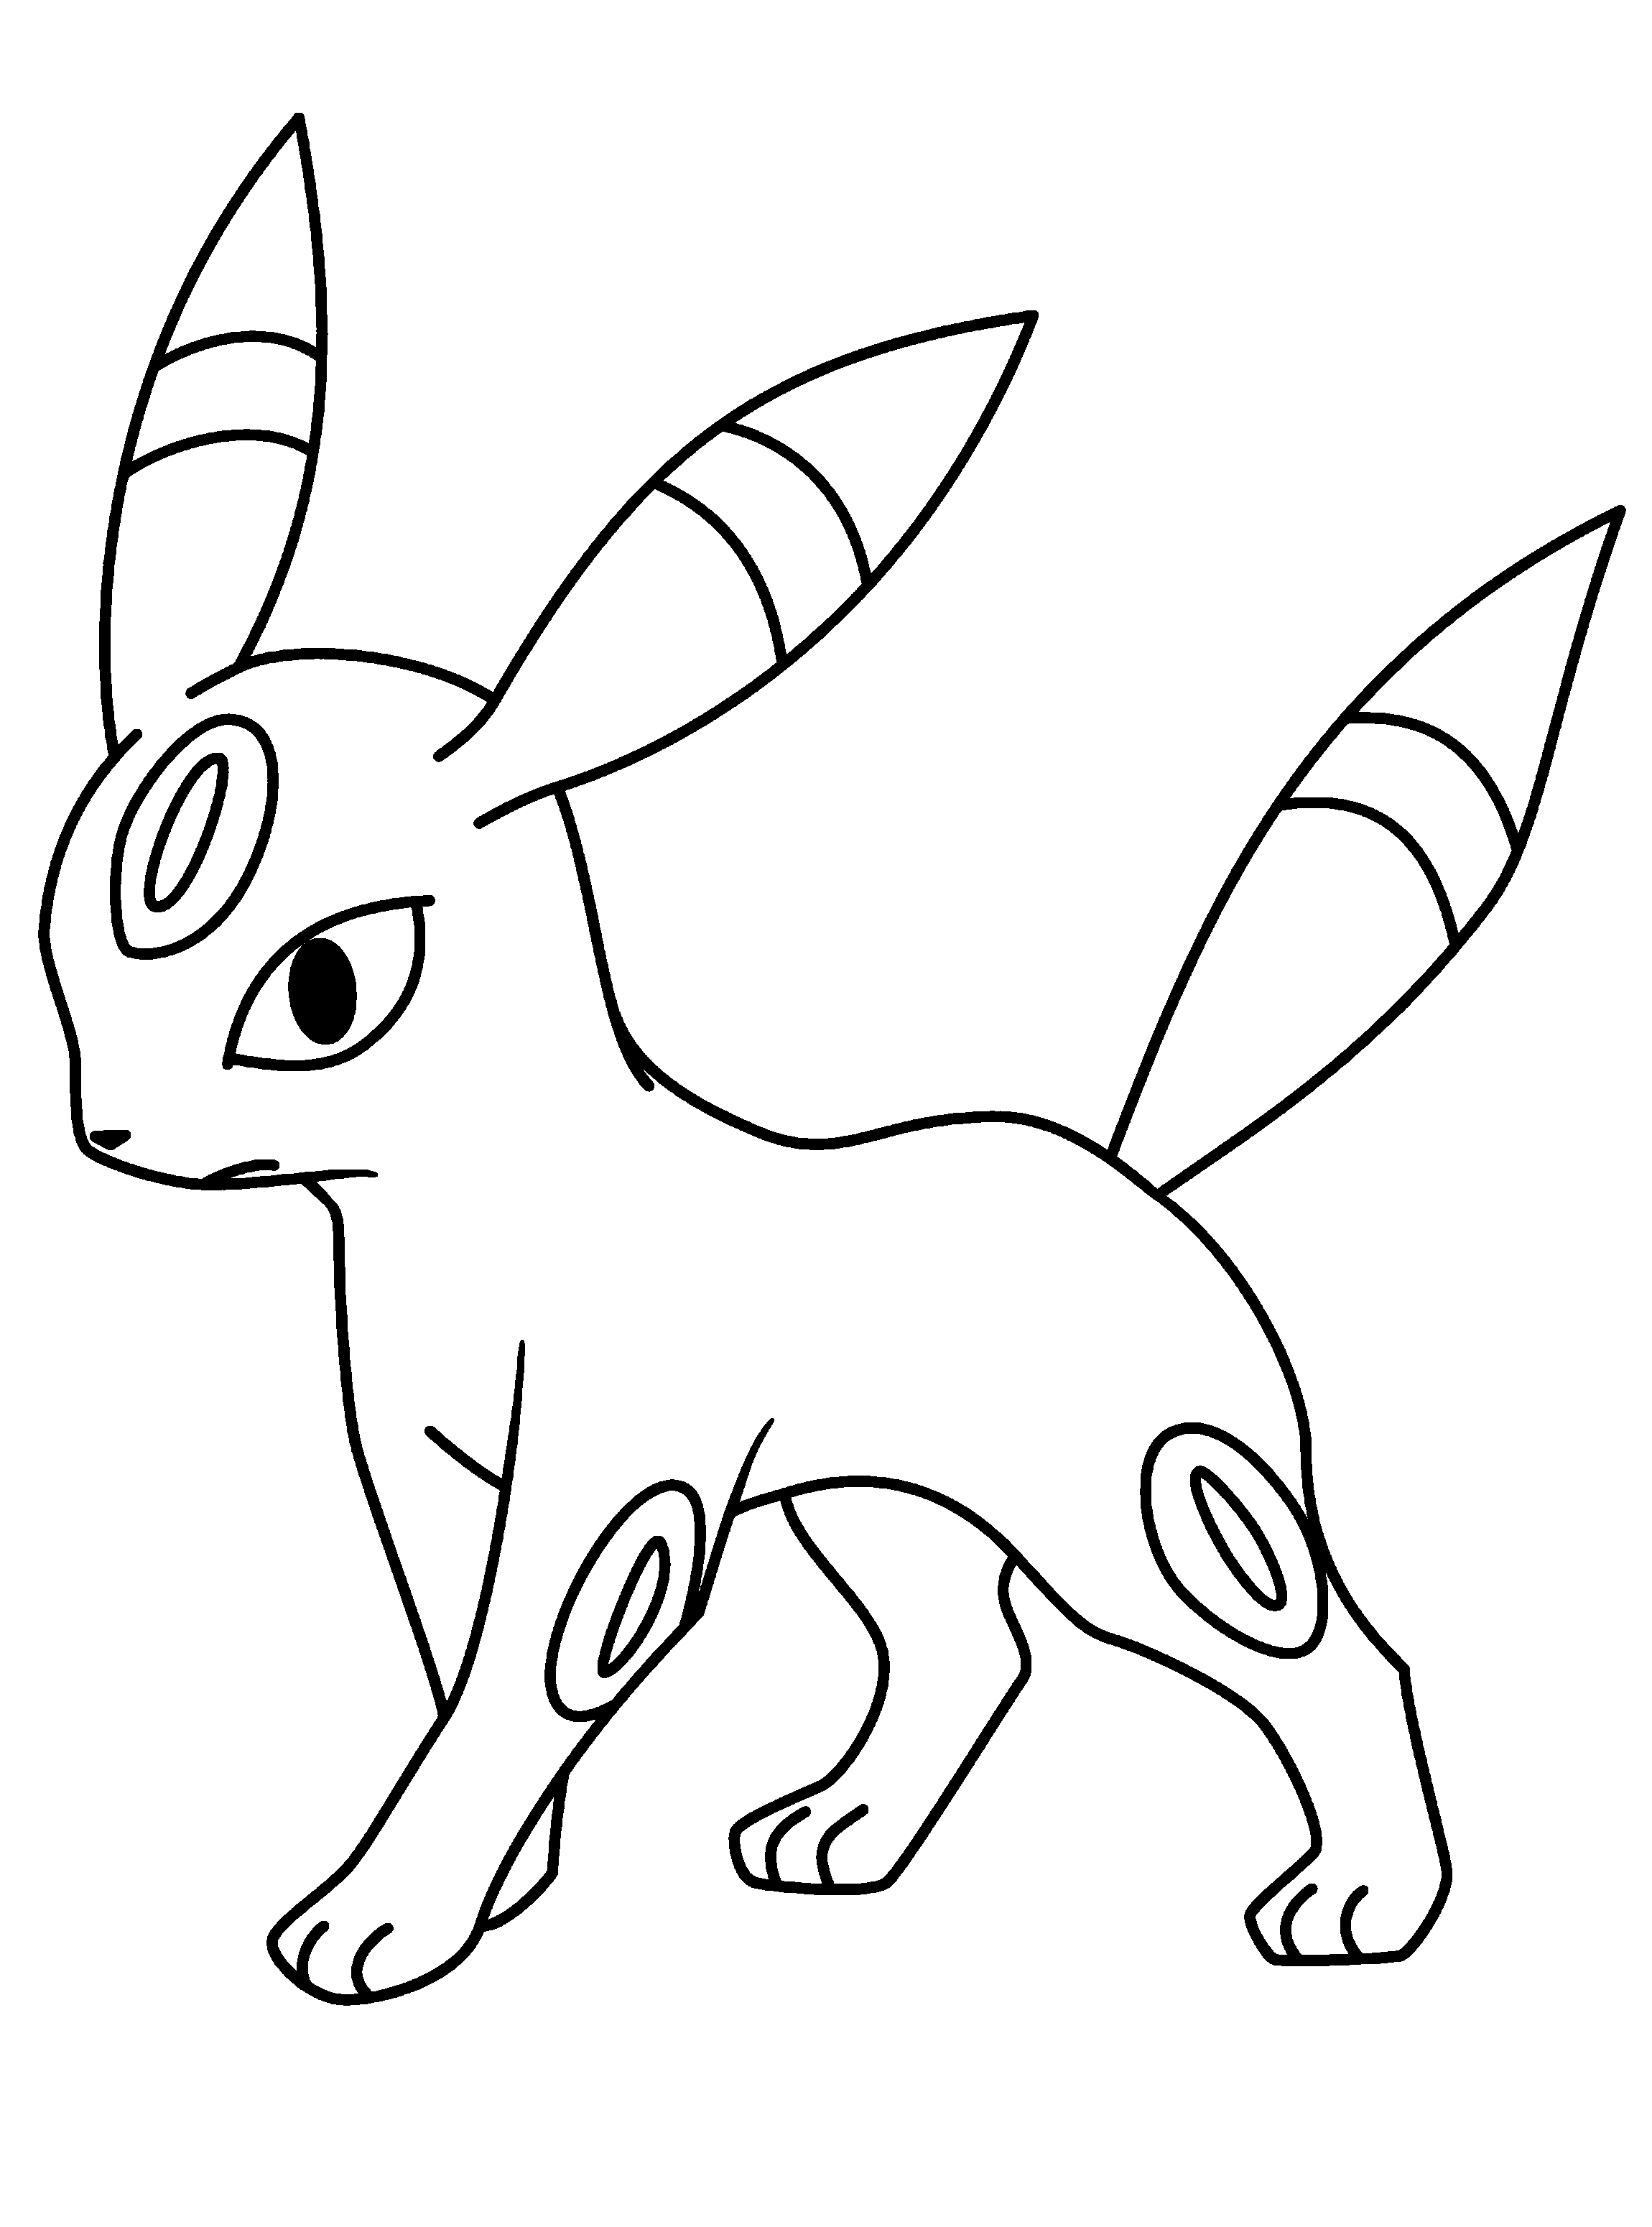 coloring pokemon pages pokemon coloring pages join your favorite pokemon on an pages coloring pokemon 